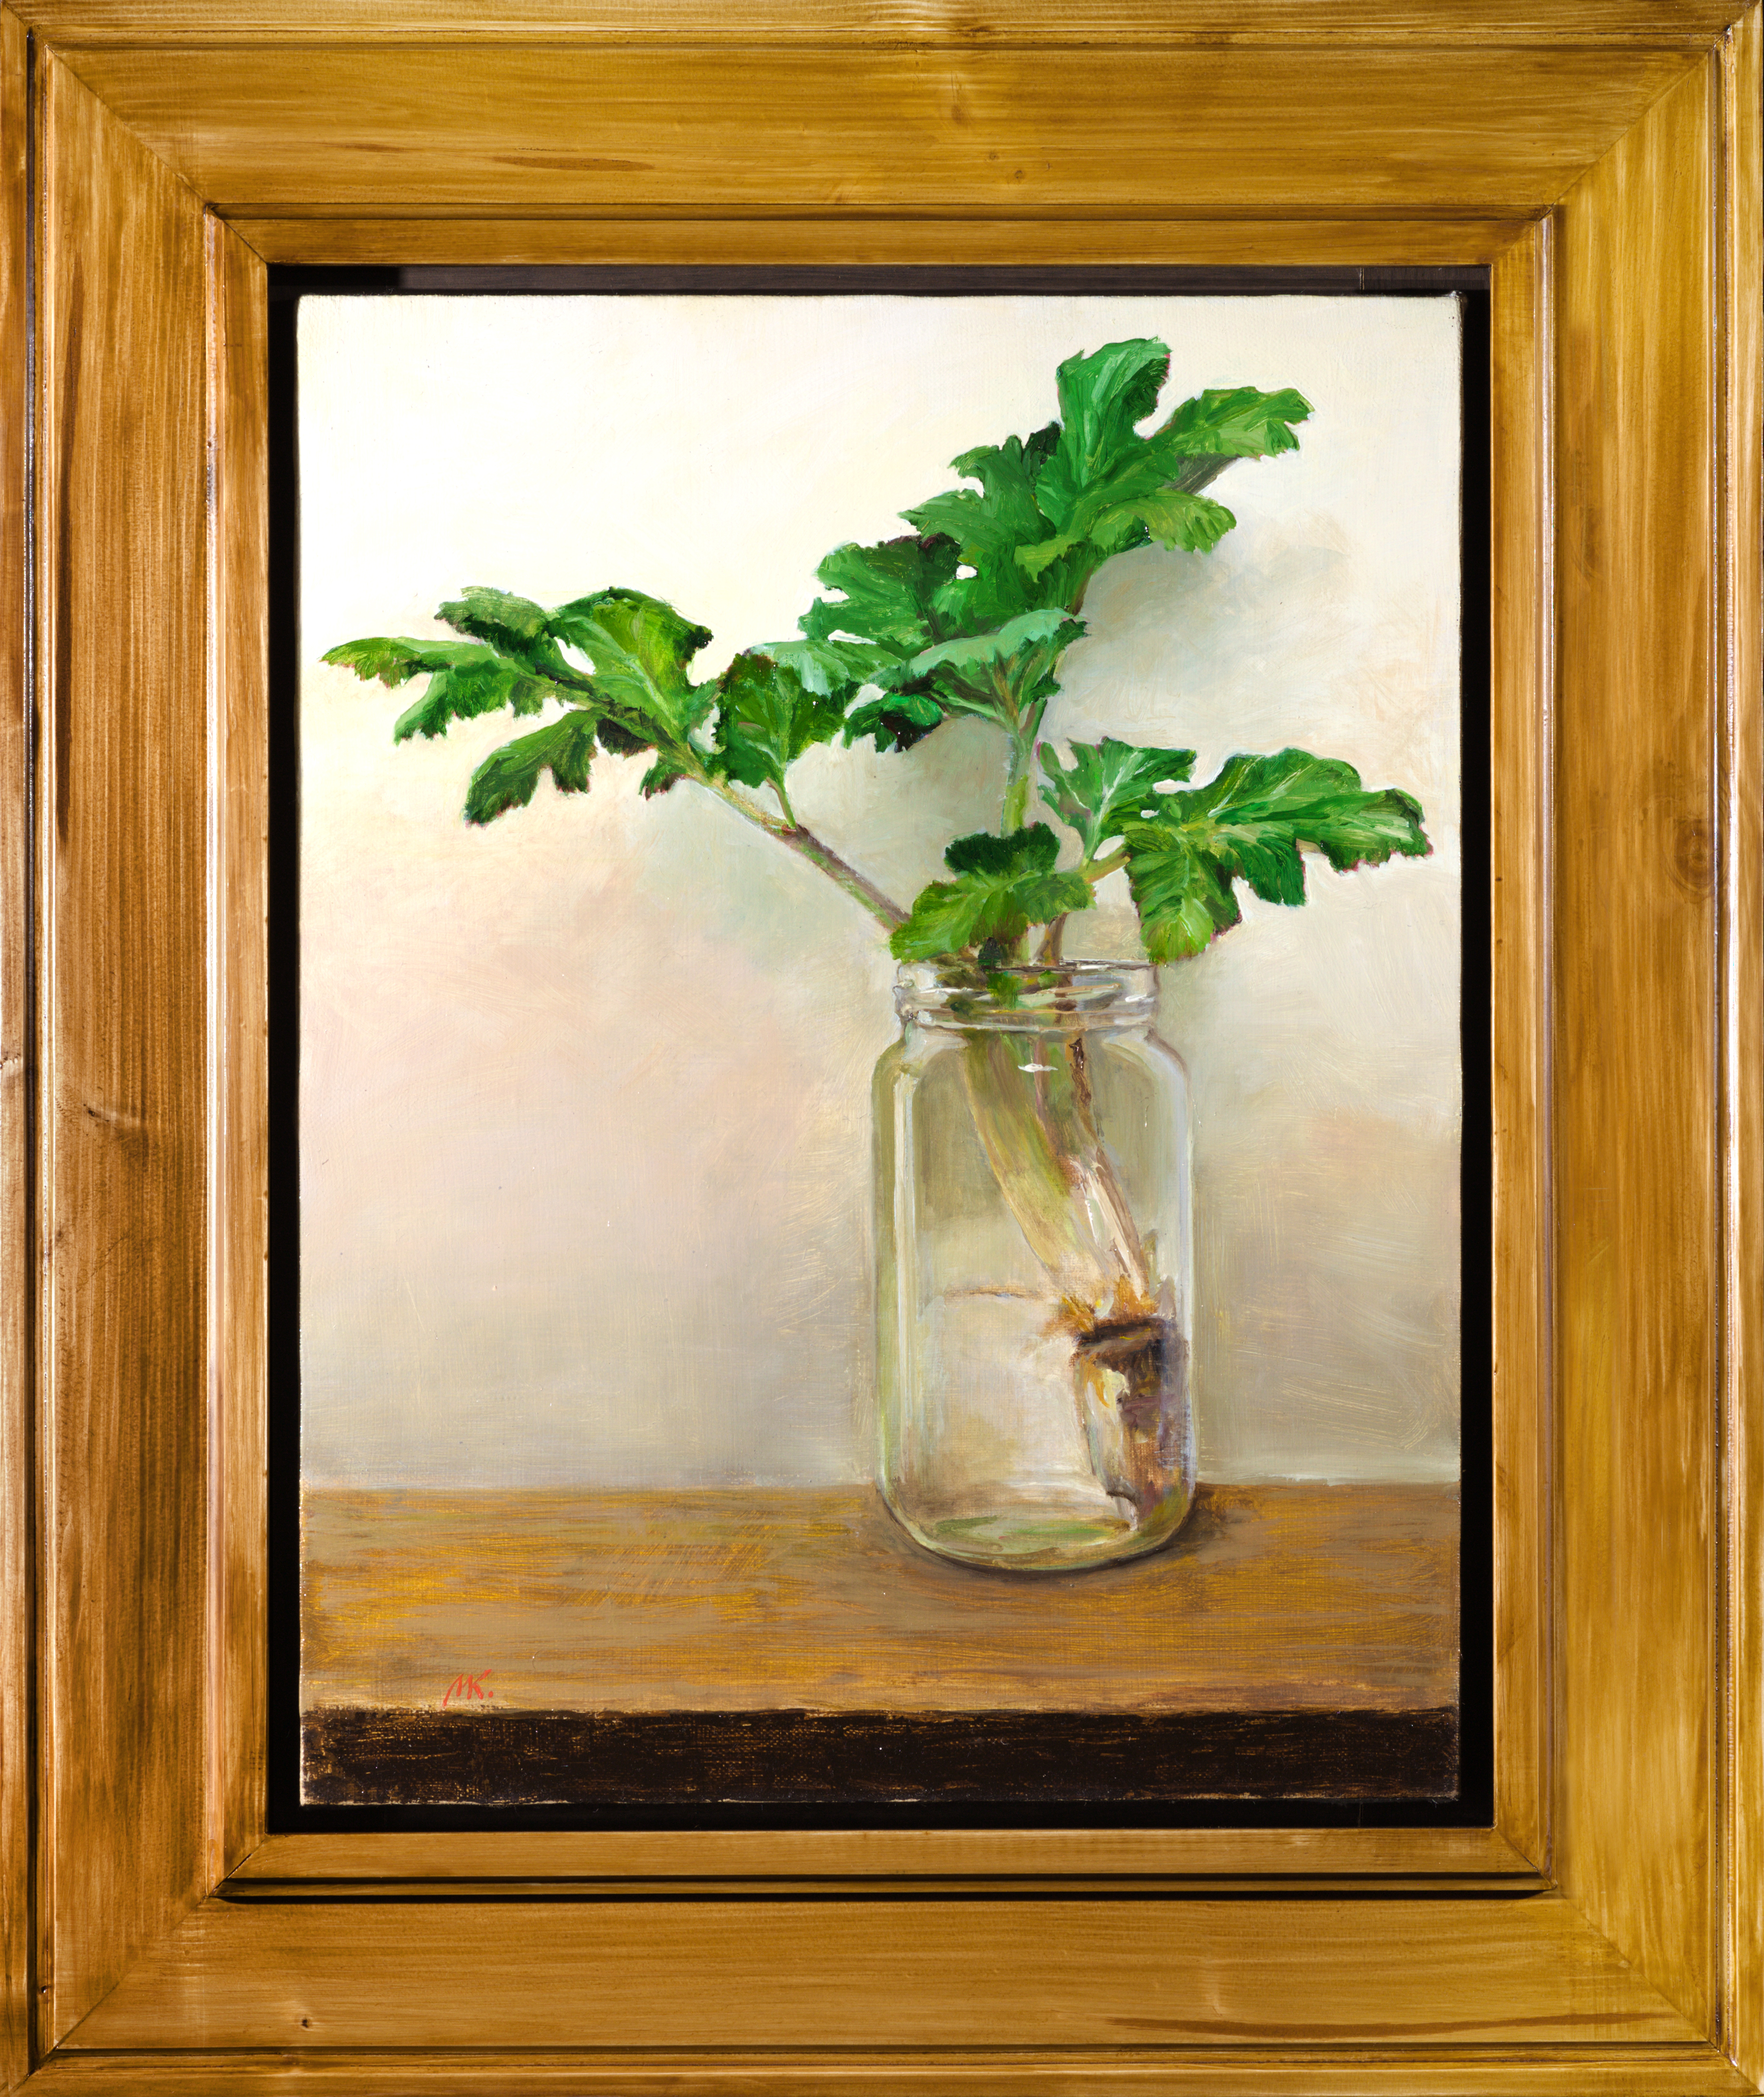 Mikhail Velavok; A Plant, 2017, Original Painting Oil, 35 x 45 cm. Artwork description: 241 Original oil painting on stretched canvas.  The artwork is being sold framed in natural light wood grain floating frame 63x53cm.  Artwork without frame has dimensions 45x35cm.  It is wired and ready for hanging.hogweed, still life, jar, glass, plant, leaf, green, yellow, brown, framed, wired, ready to ...